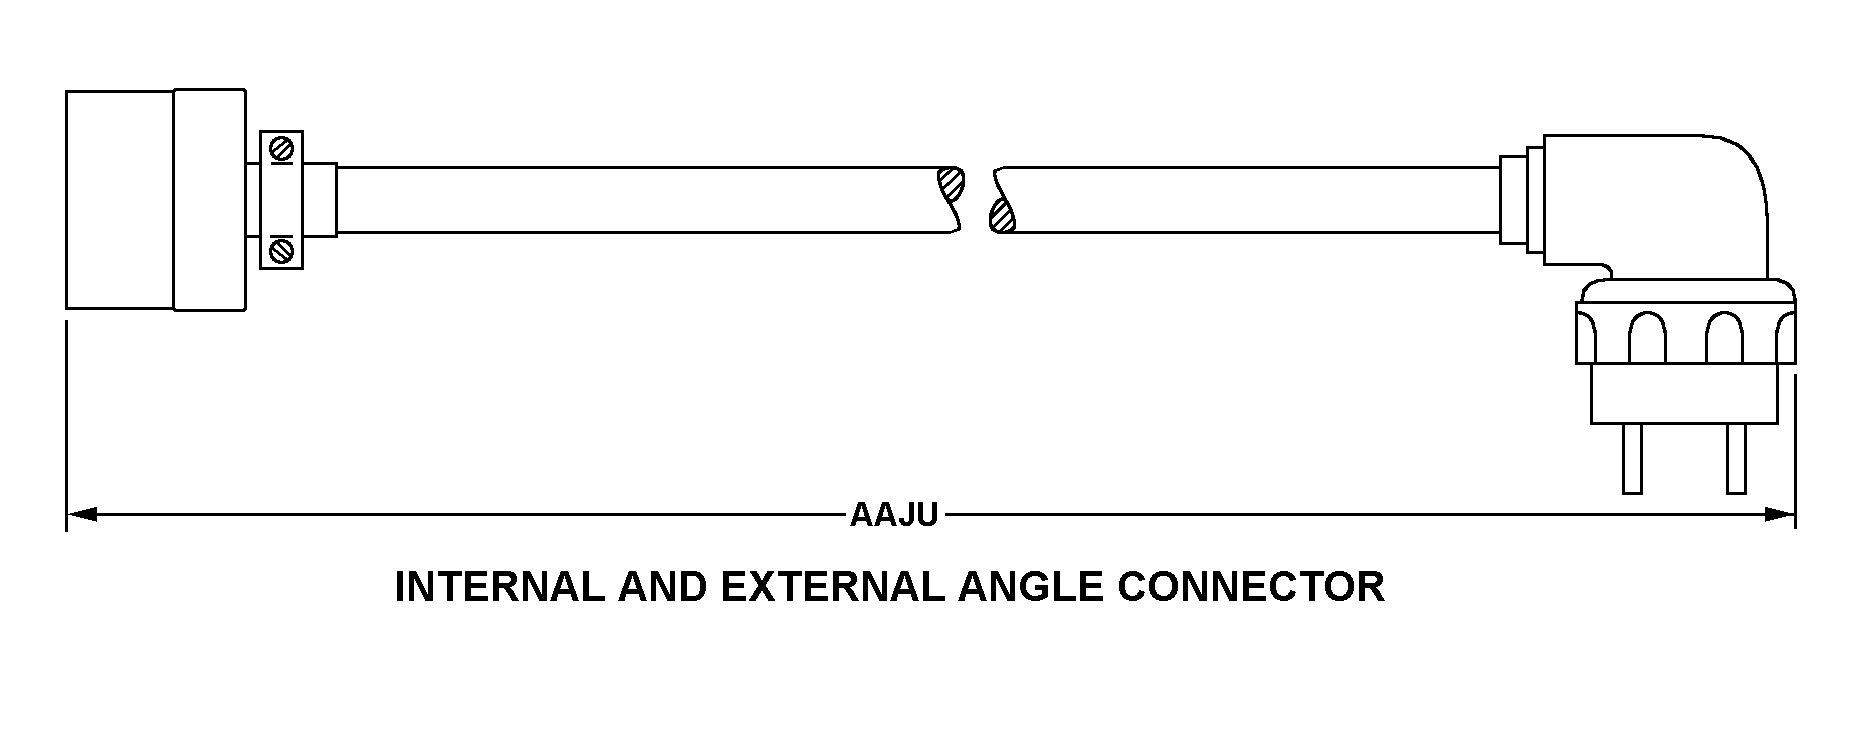 INTERNAL AND EXTERNAL ANGLE CONNECTOR style nsn 5995-01-411-7429